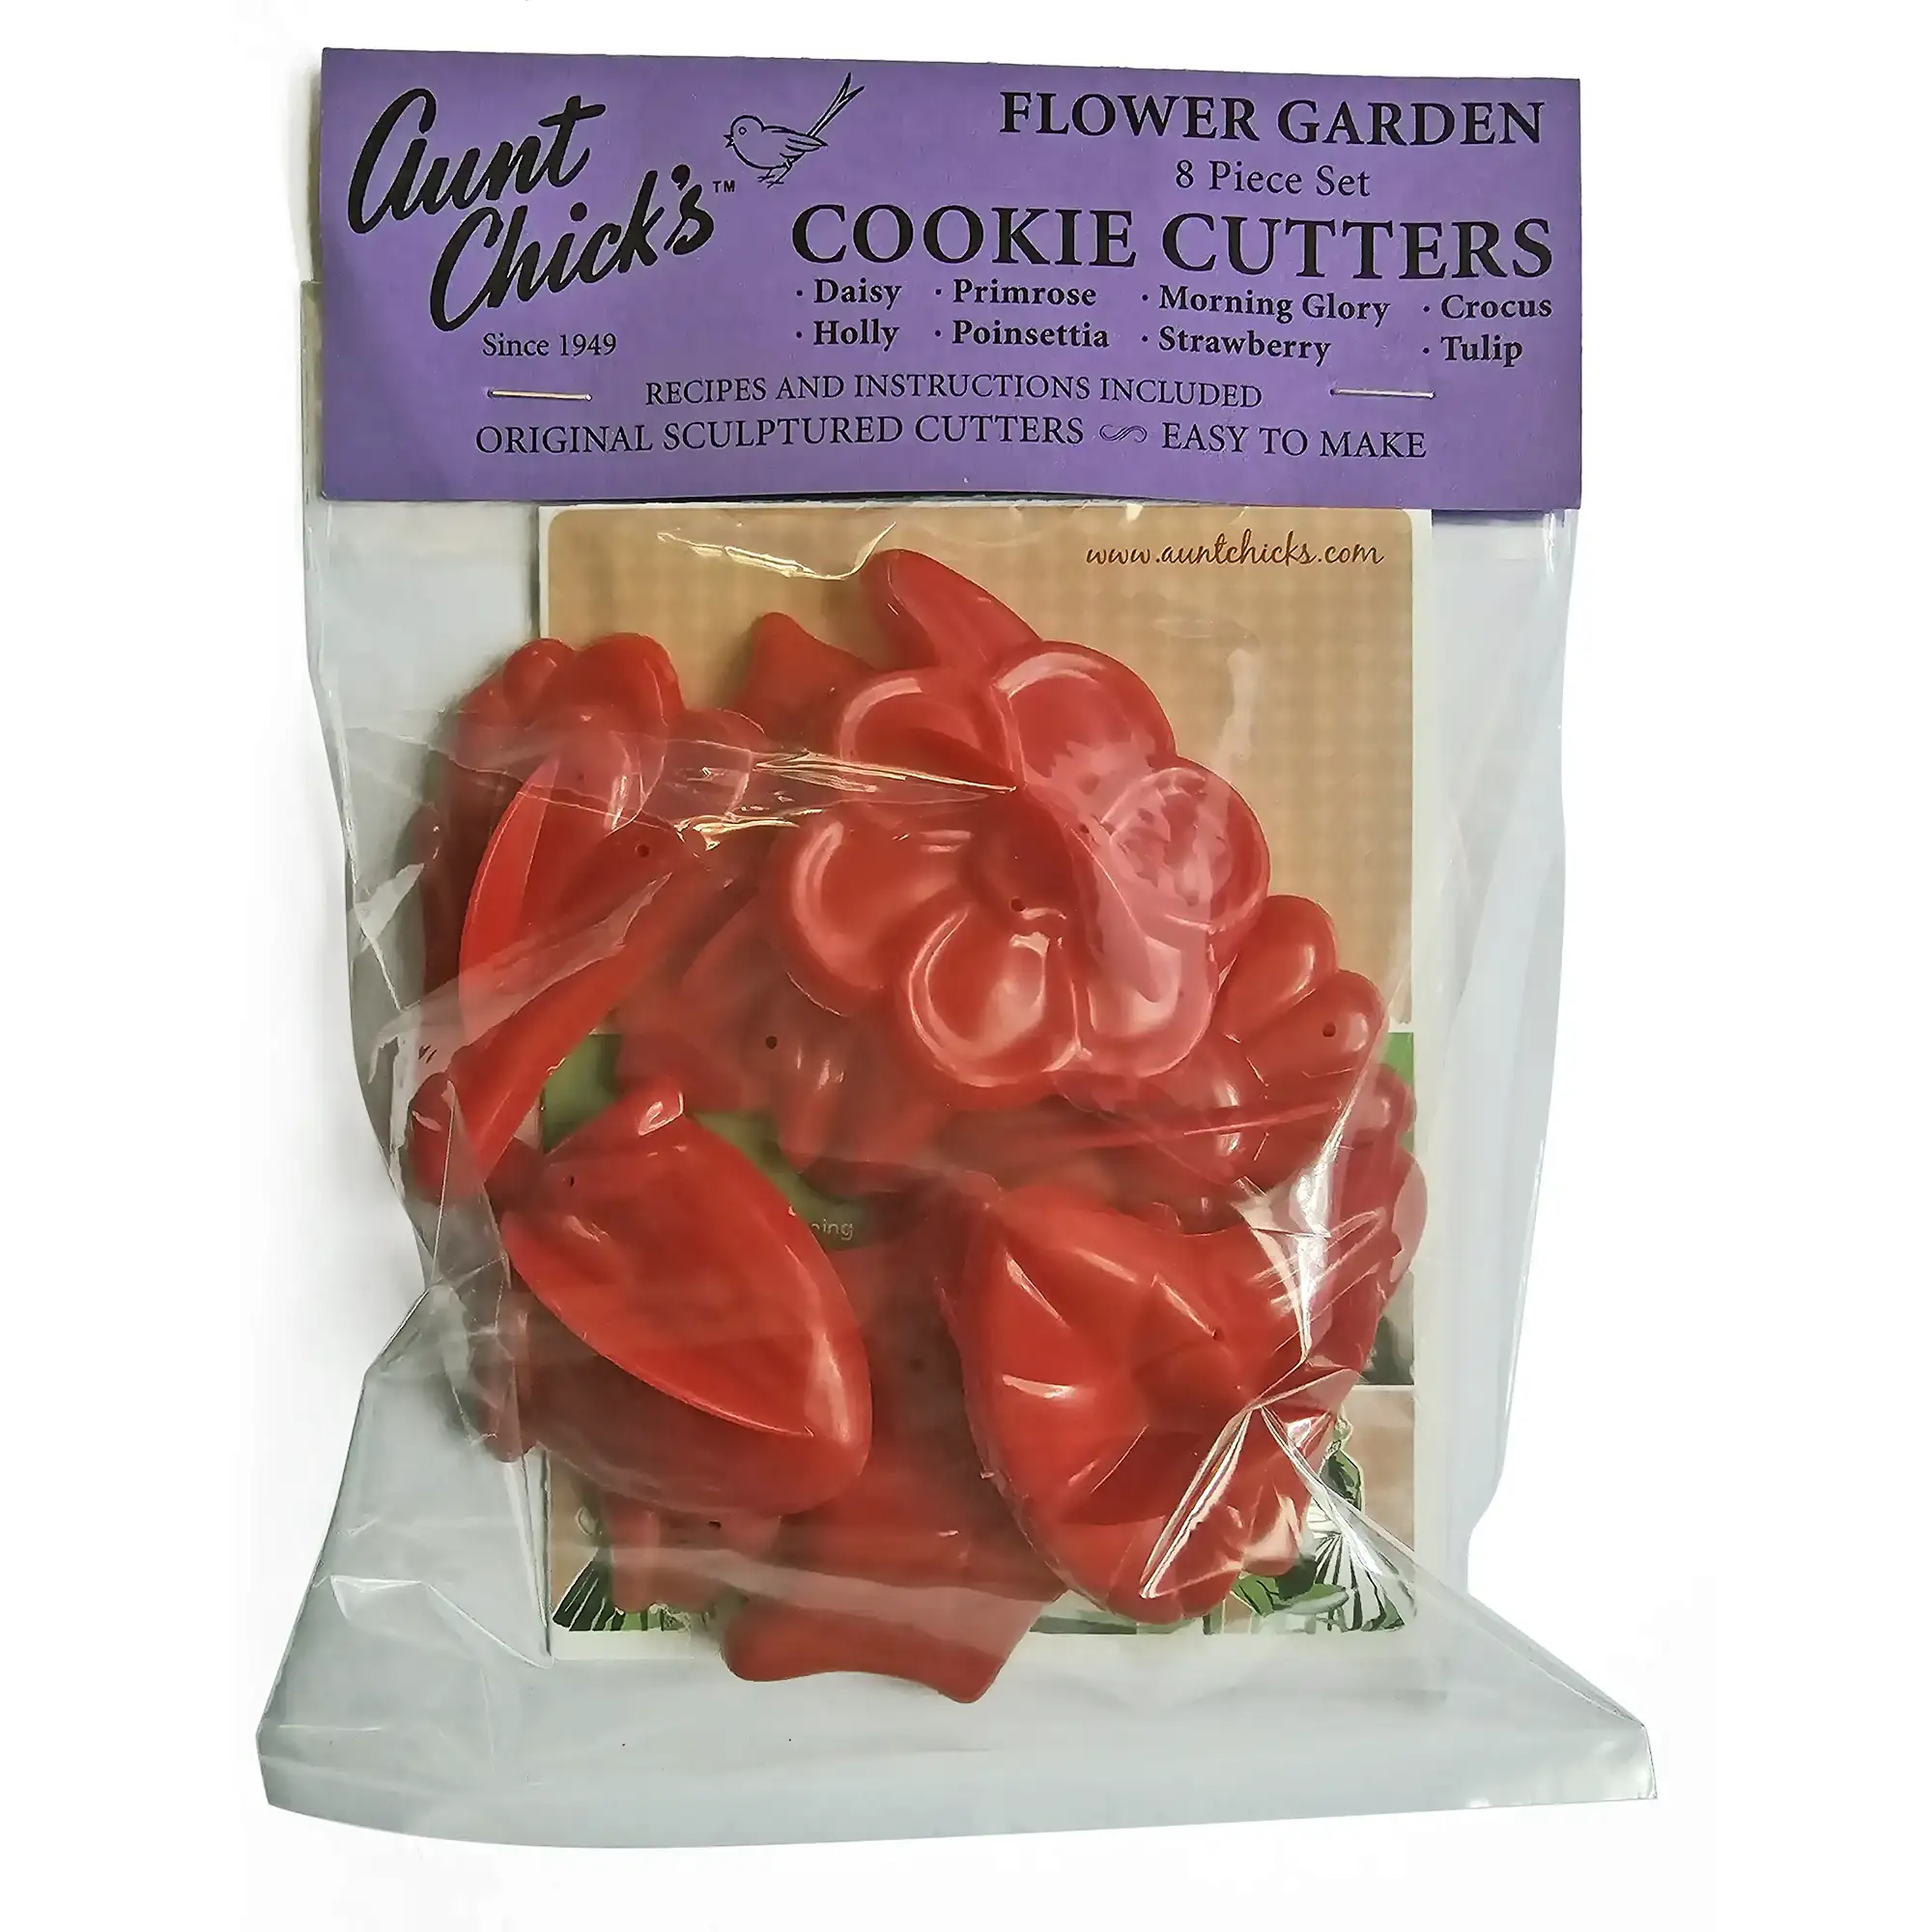 Aunt Chick's Flower Garden Cookie Cutters Bagged Set with Recipe and Decorating ideas